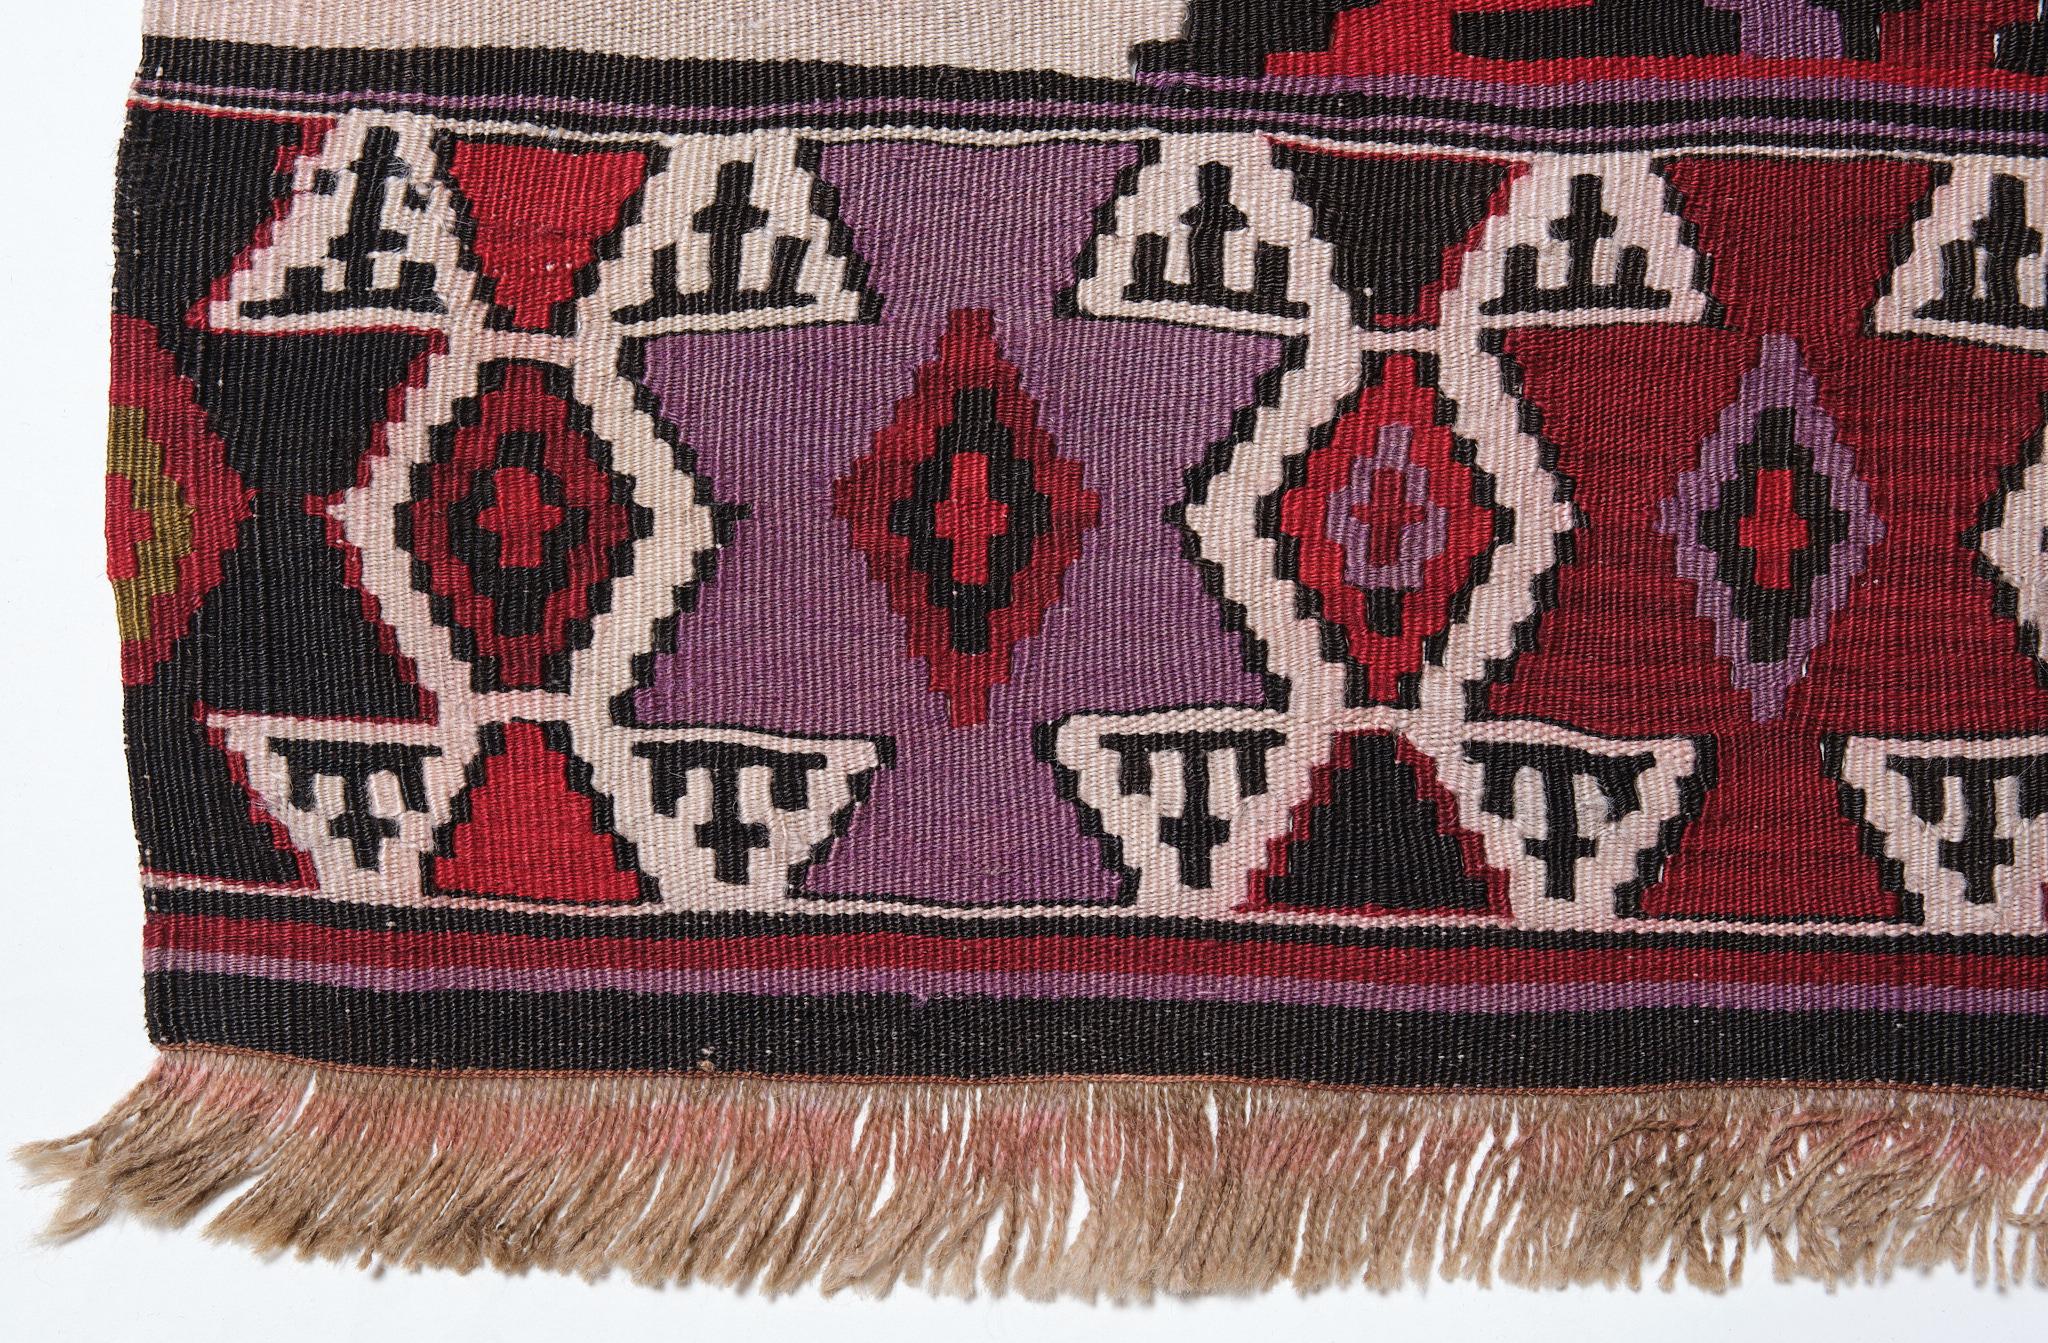 This is Central Anatolian Antique one halve of Kilim from the Konya - Karaman region with a rare and beautiful color composition.

As early as the 13th century MarCo Polo noted, in his account of his travels to the region, that superlative rugs